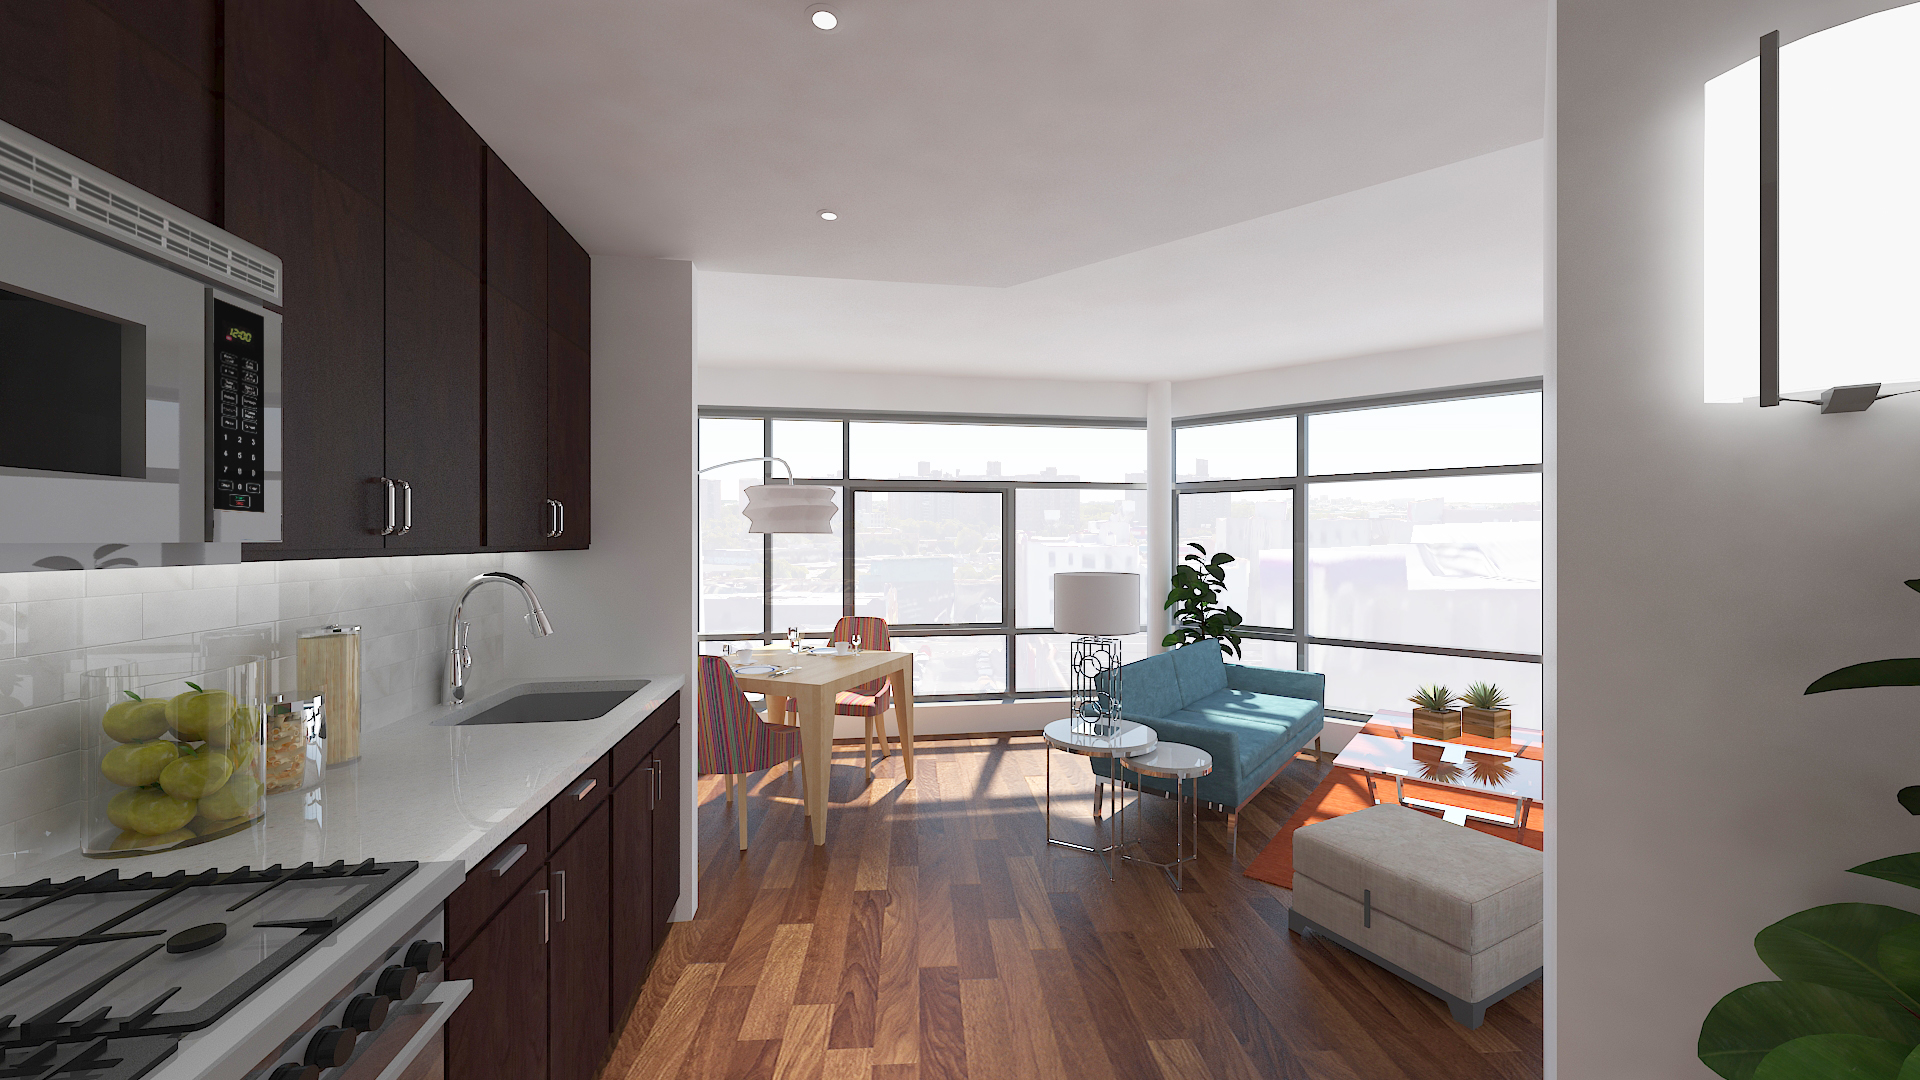 A living room at 1017 Home Street, rendering by Body Lawson Associates